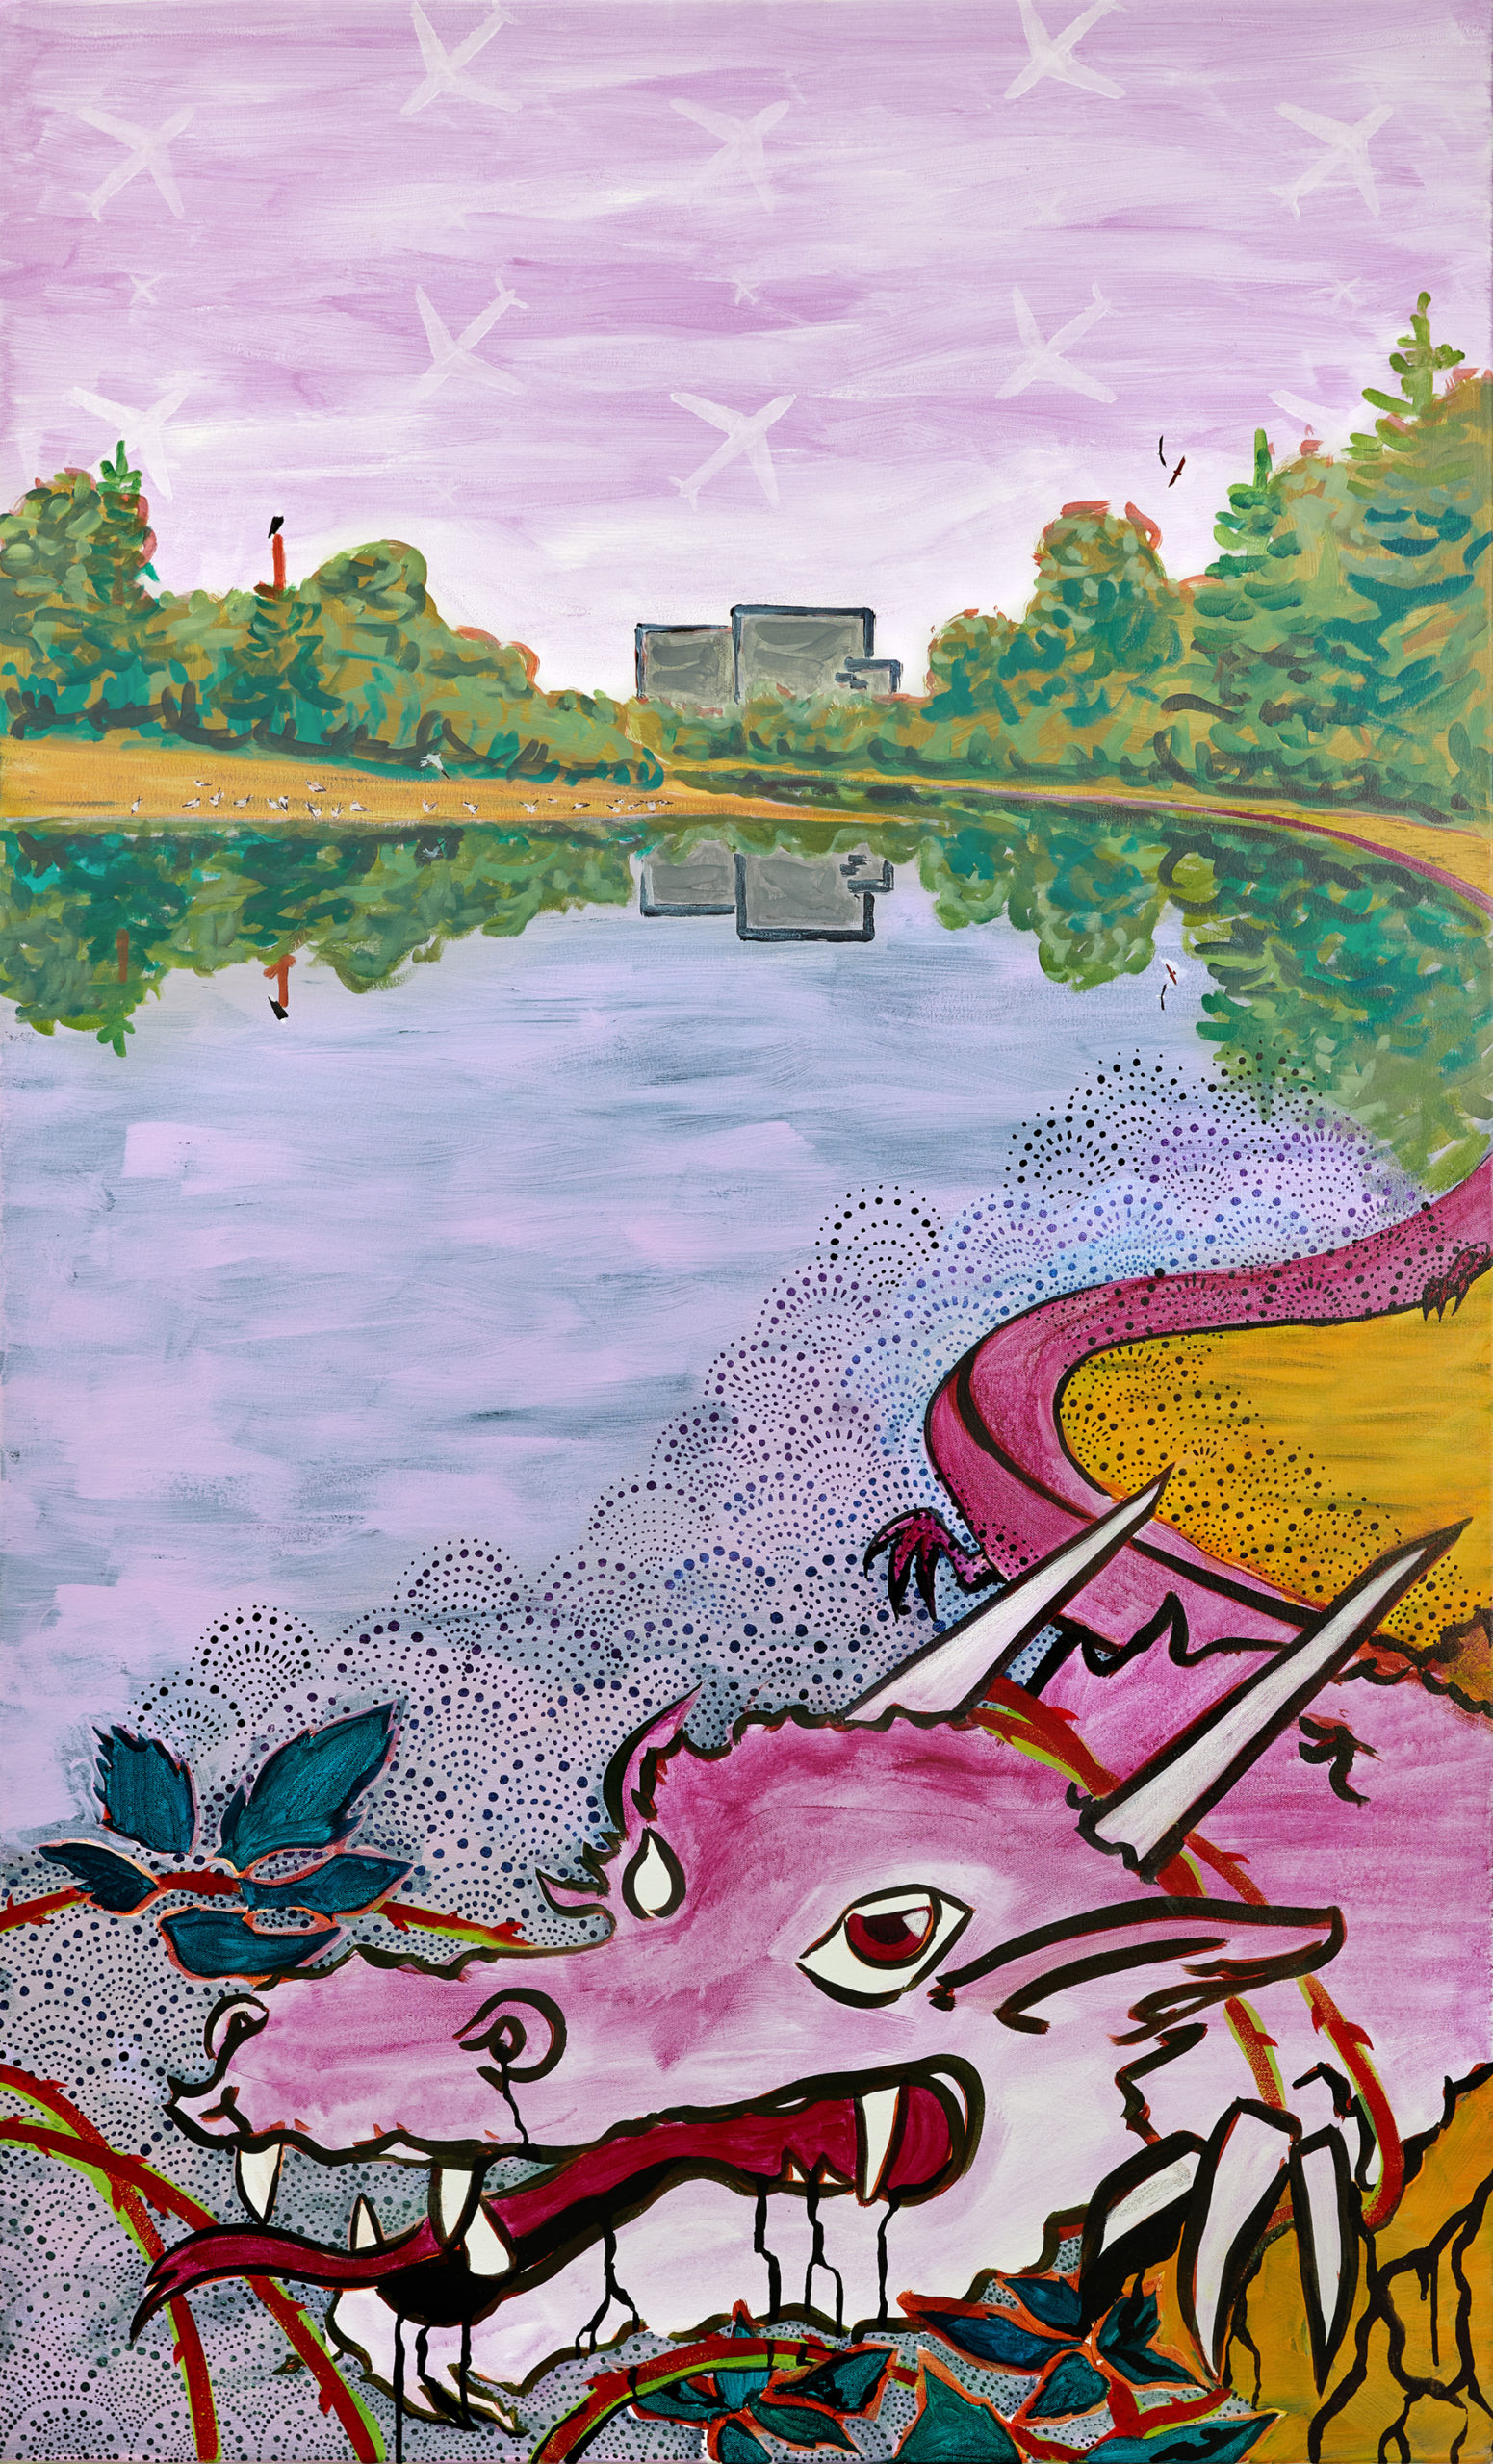 a painted representation of Seattle's Duwamish River as a dragon struggling against habitual pollution